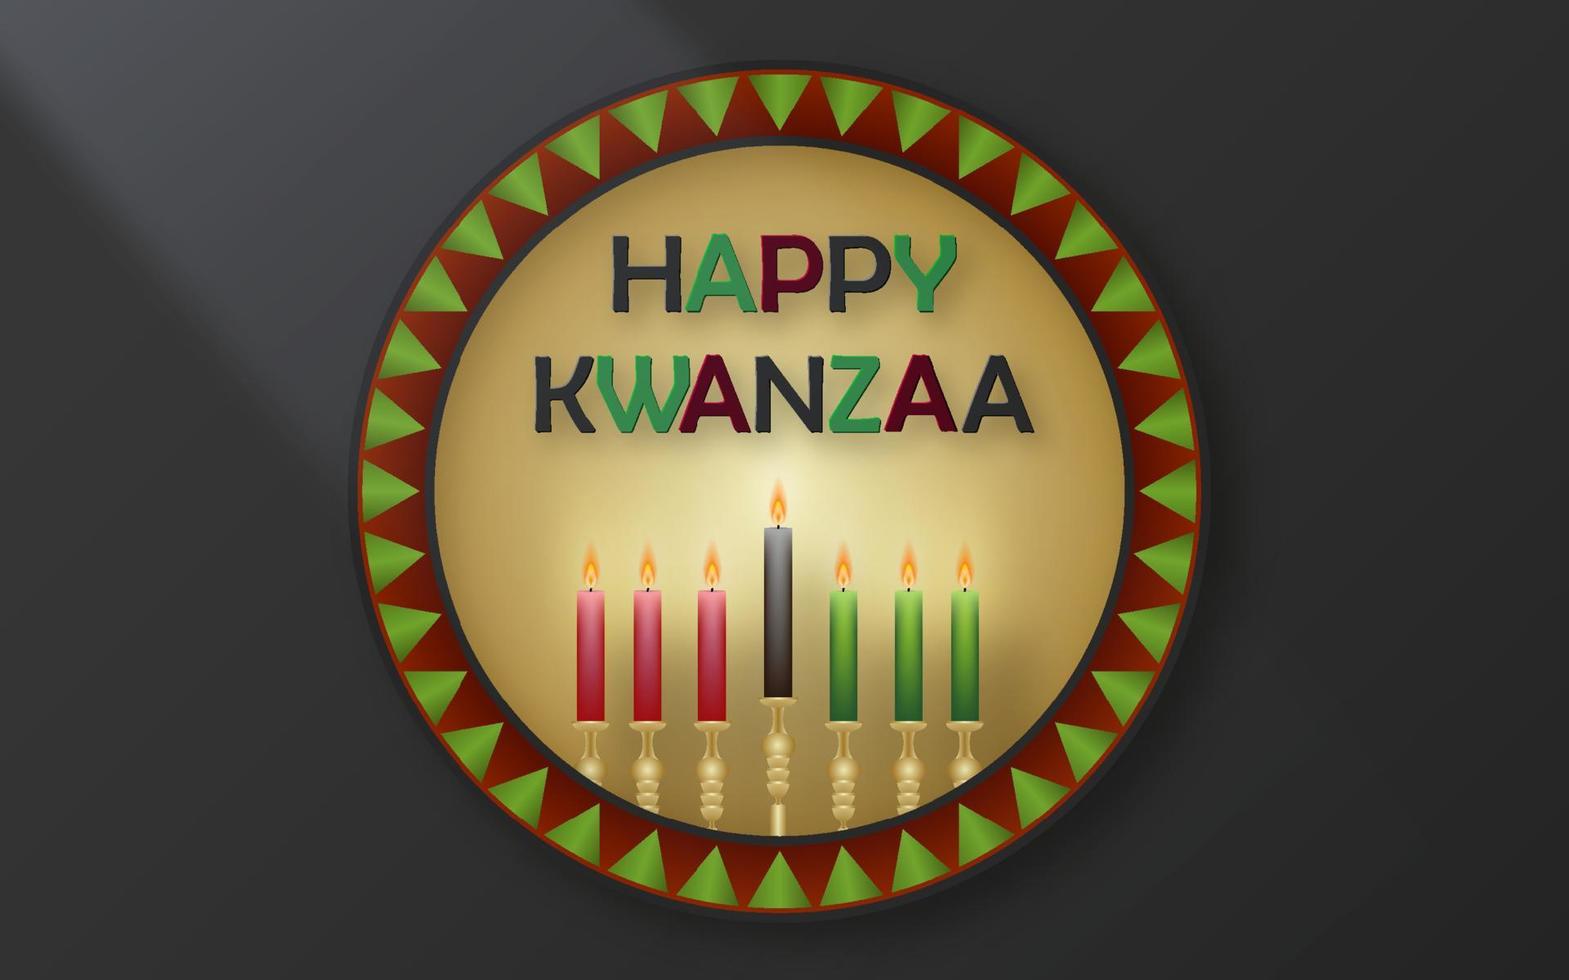 Happy kwanzaa card with nice and creative symbols on color background for kwanzaa holiday vector